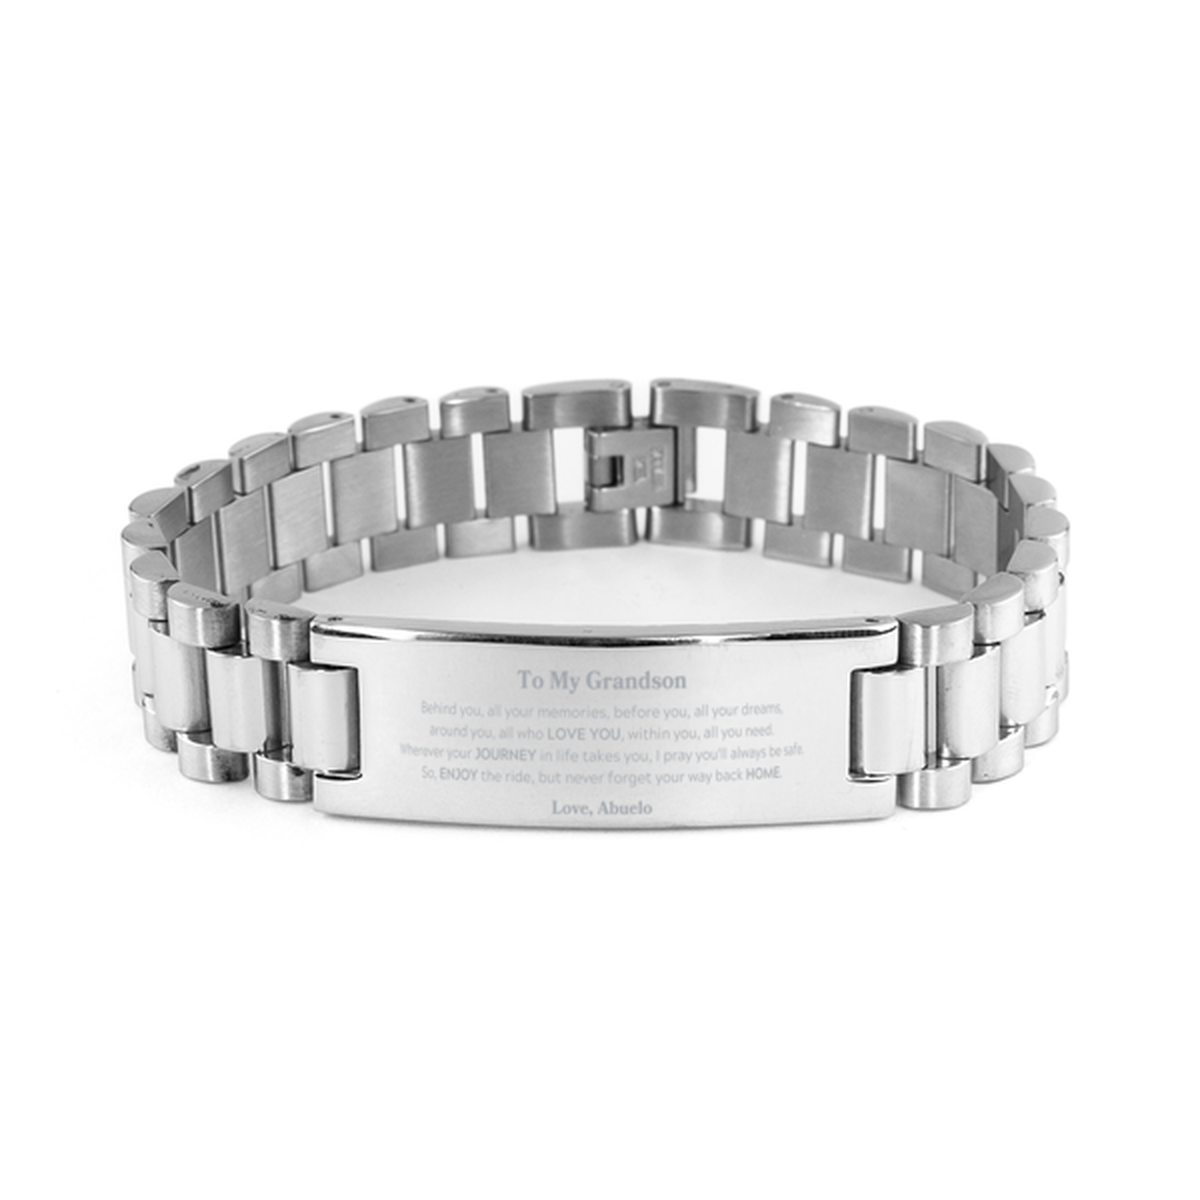 To My Grandson Graduation Gifts from Abuelo, Grandson Ladder Stainless Steel Bracelet Christmas Birthday Gifts for Grandson Behind you, all your memories, before you, all your dreams. Love, Abuelo